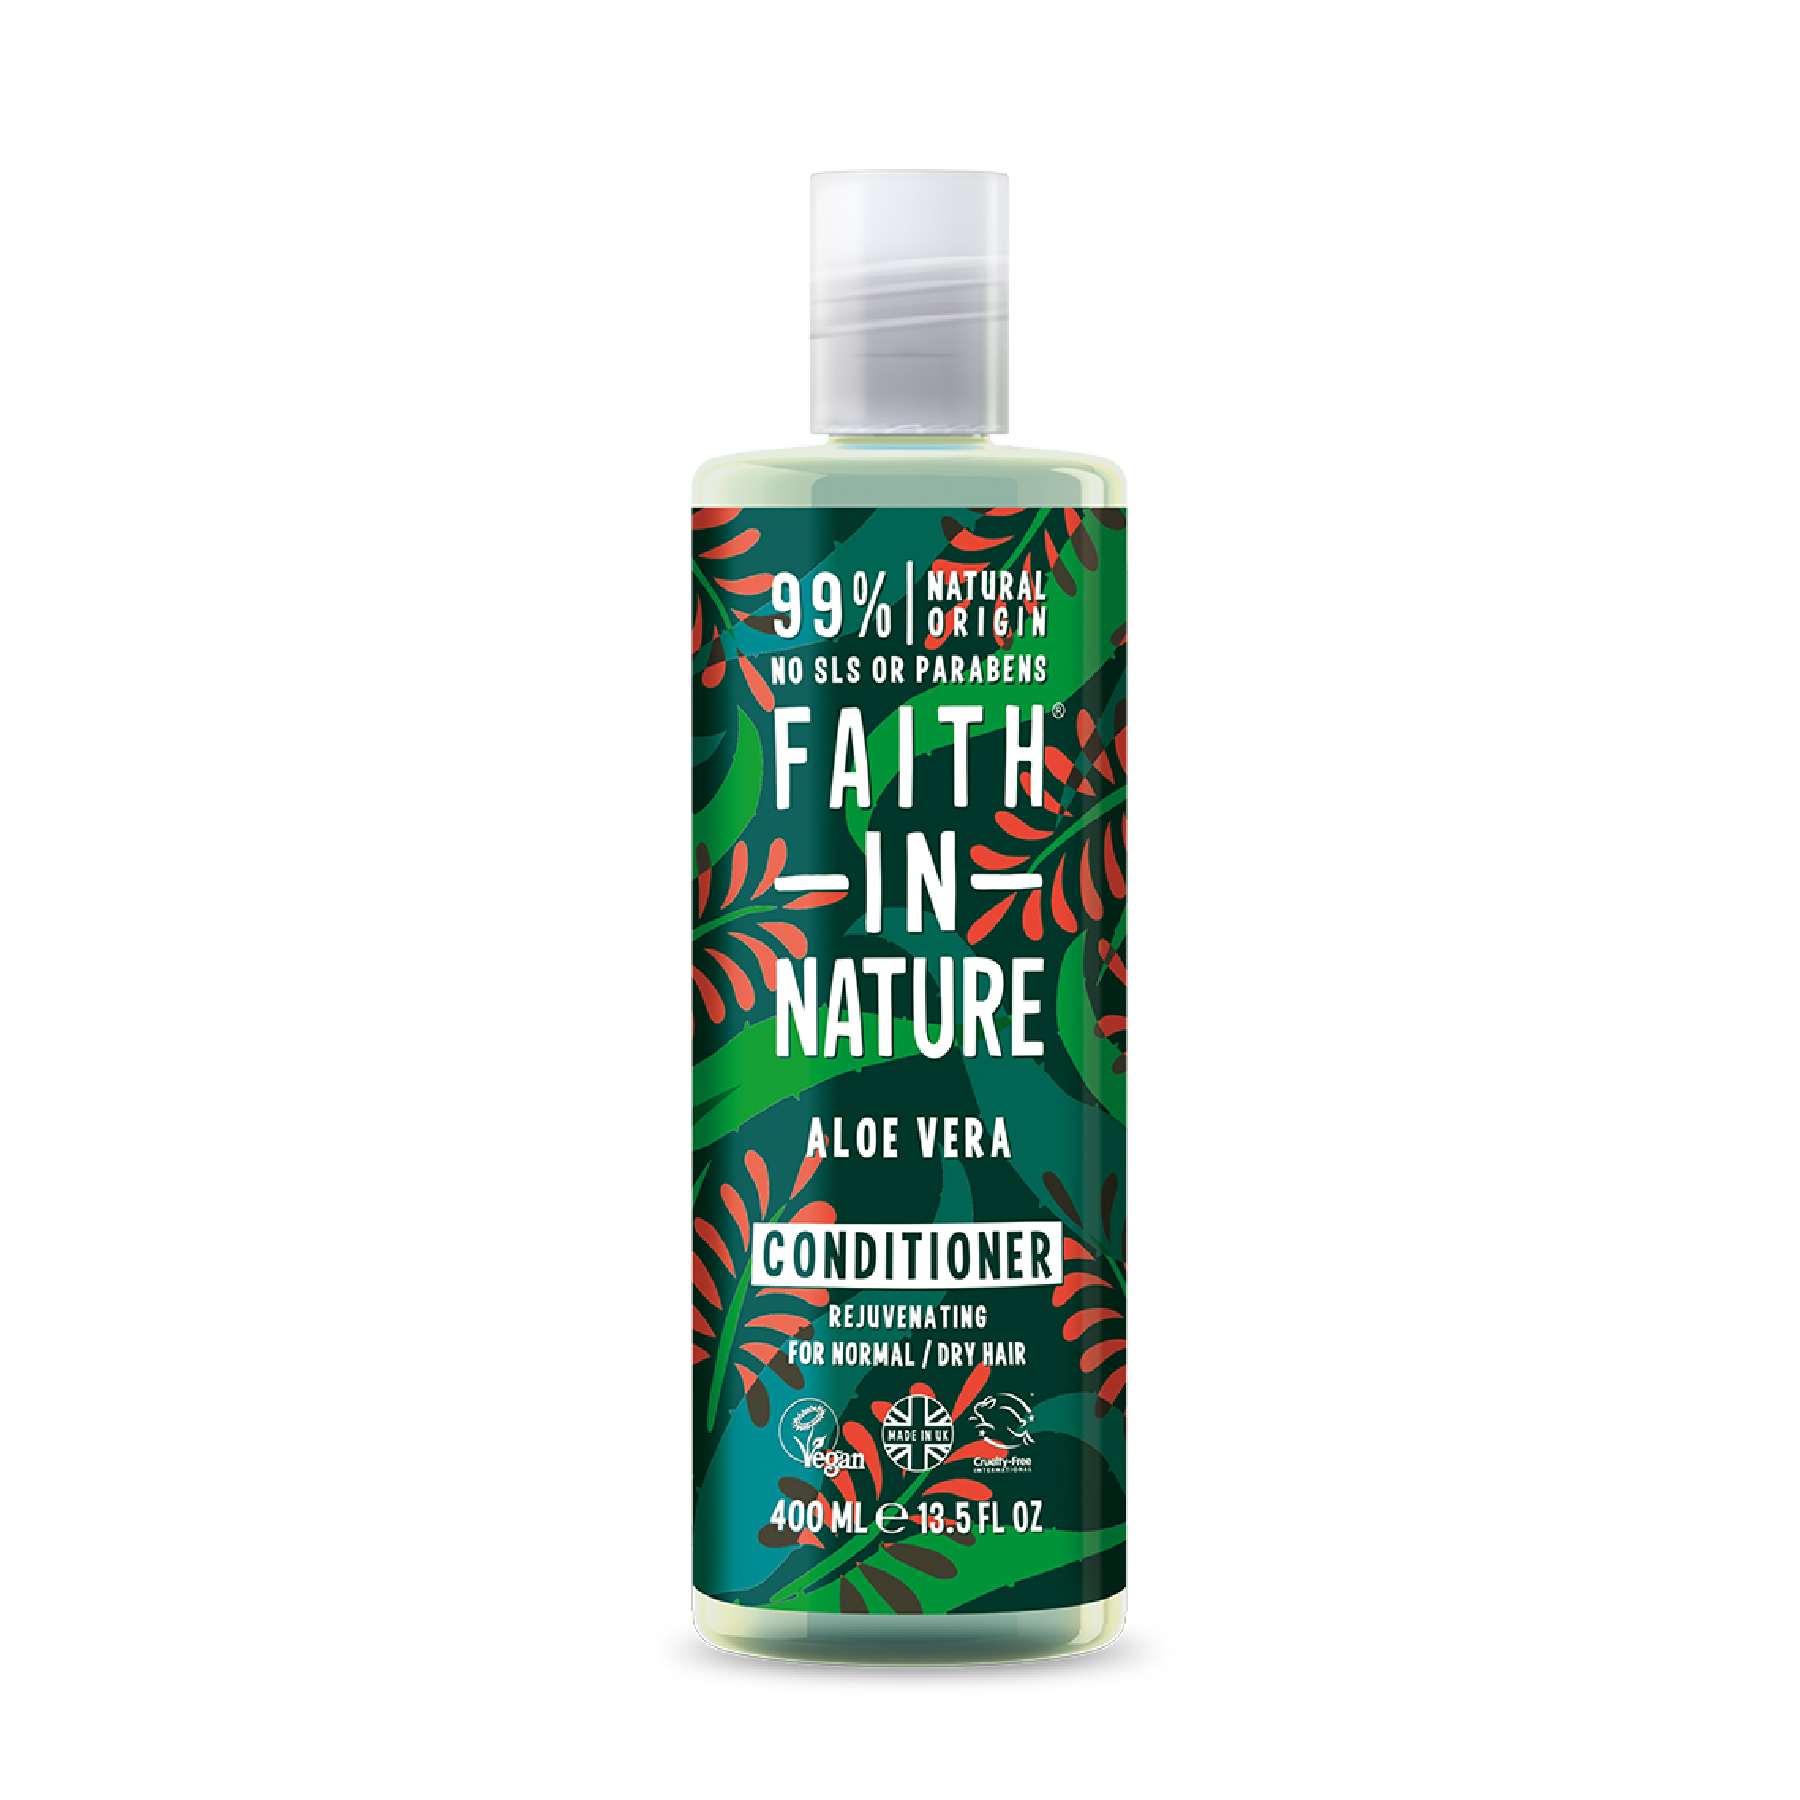 Shop Aloe Vera Conditioner from Faith in Nature on SublimeLife.in. Best for providing natural nourishment to your hair.